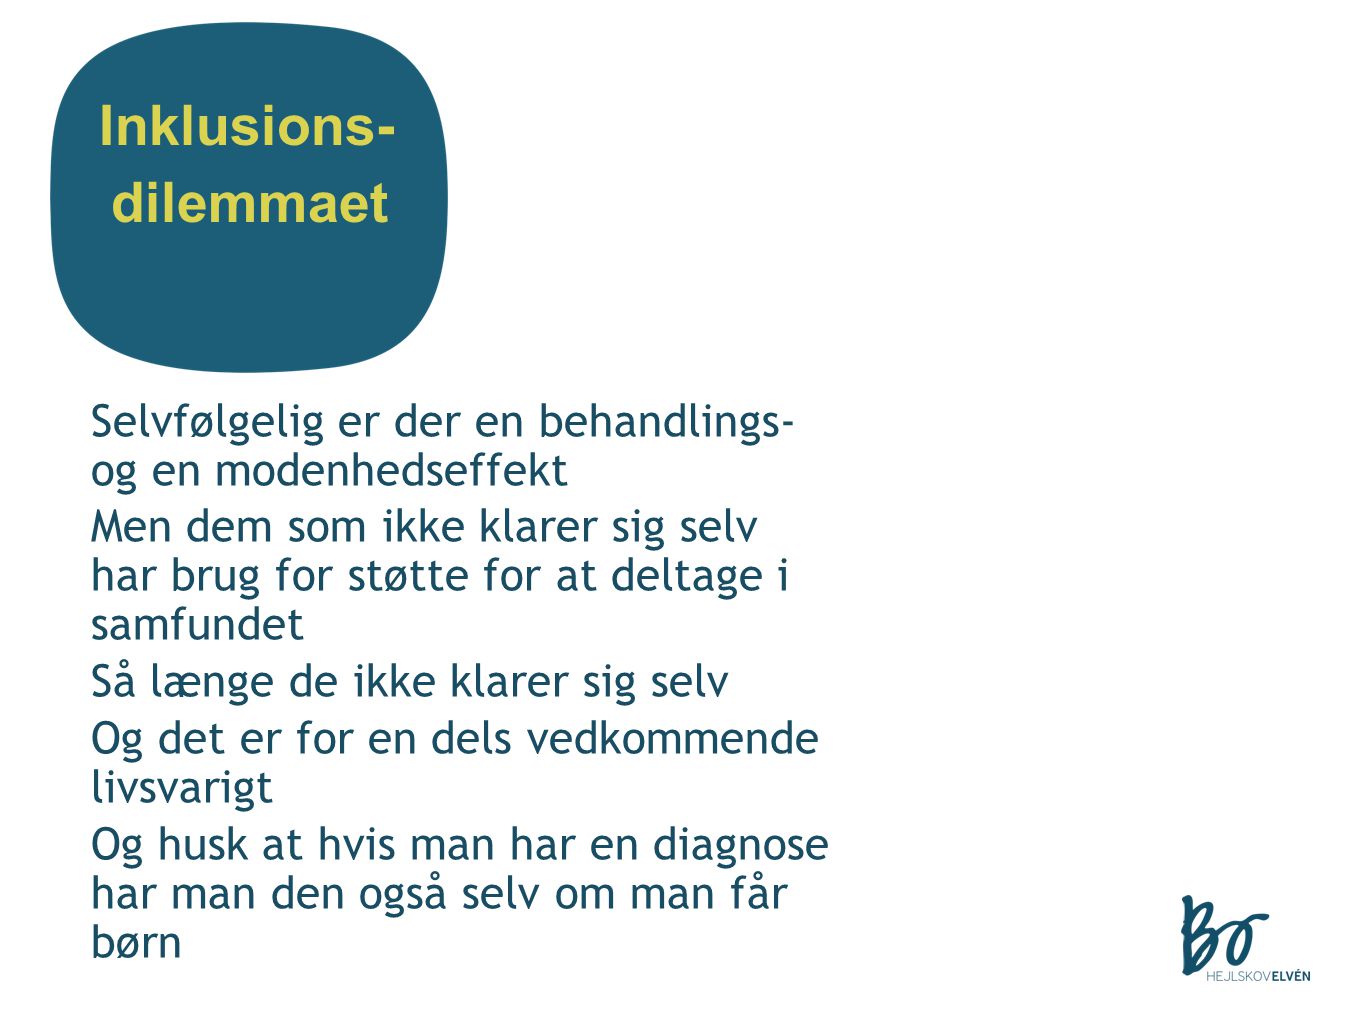 Inklusions- dilemmaet